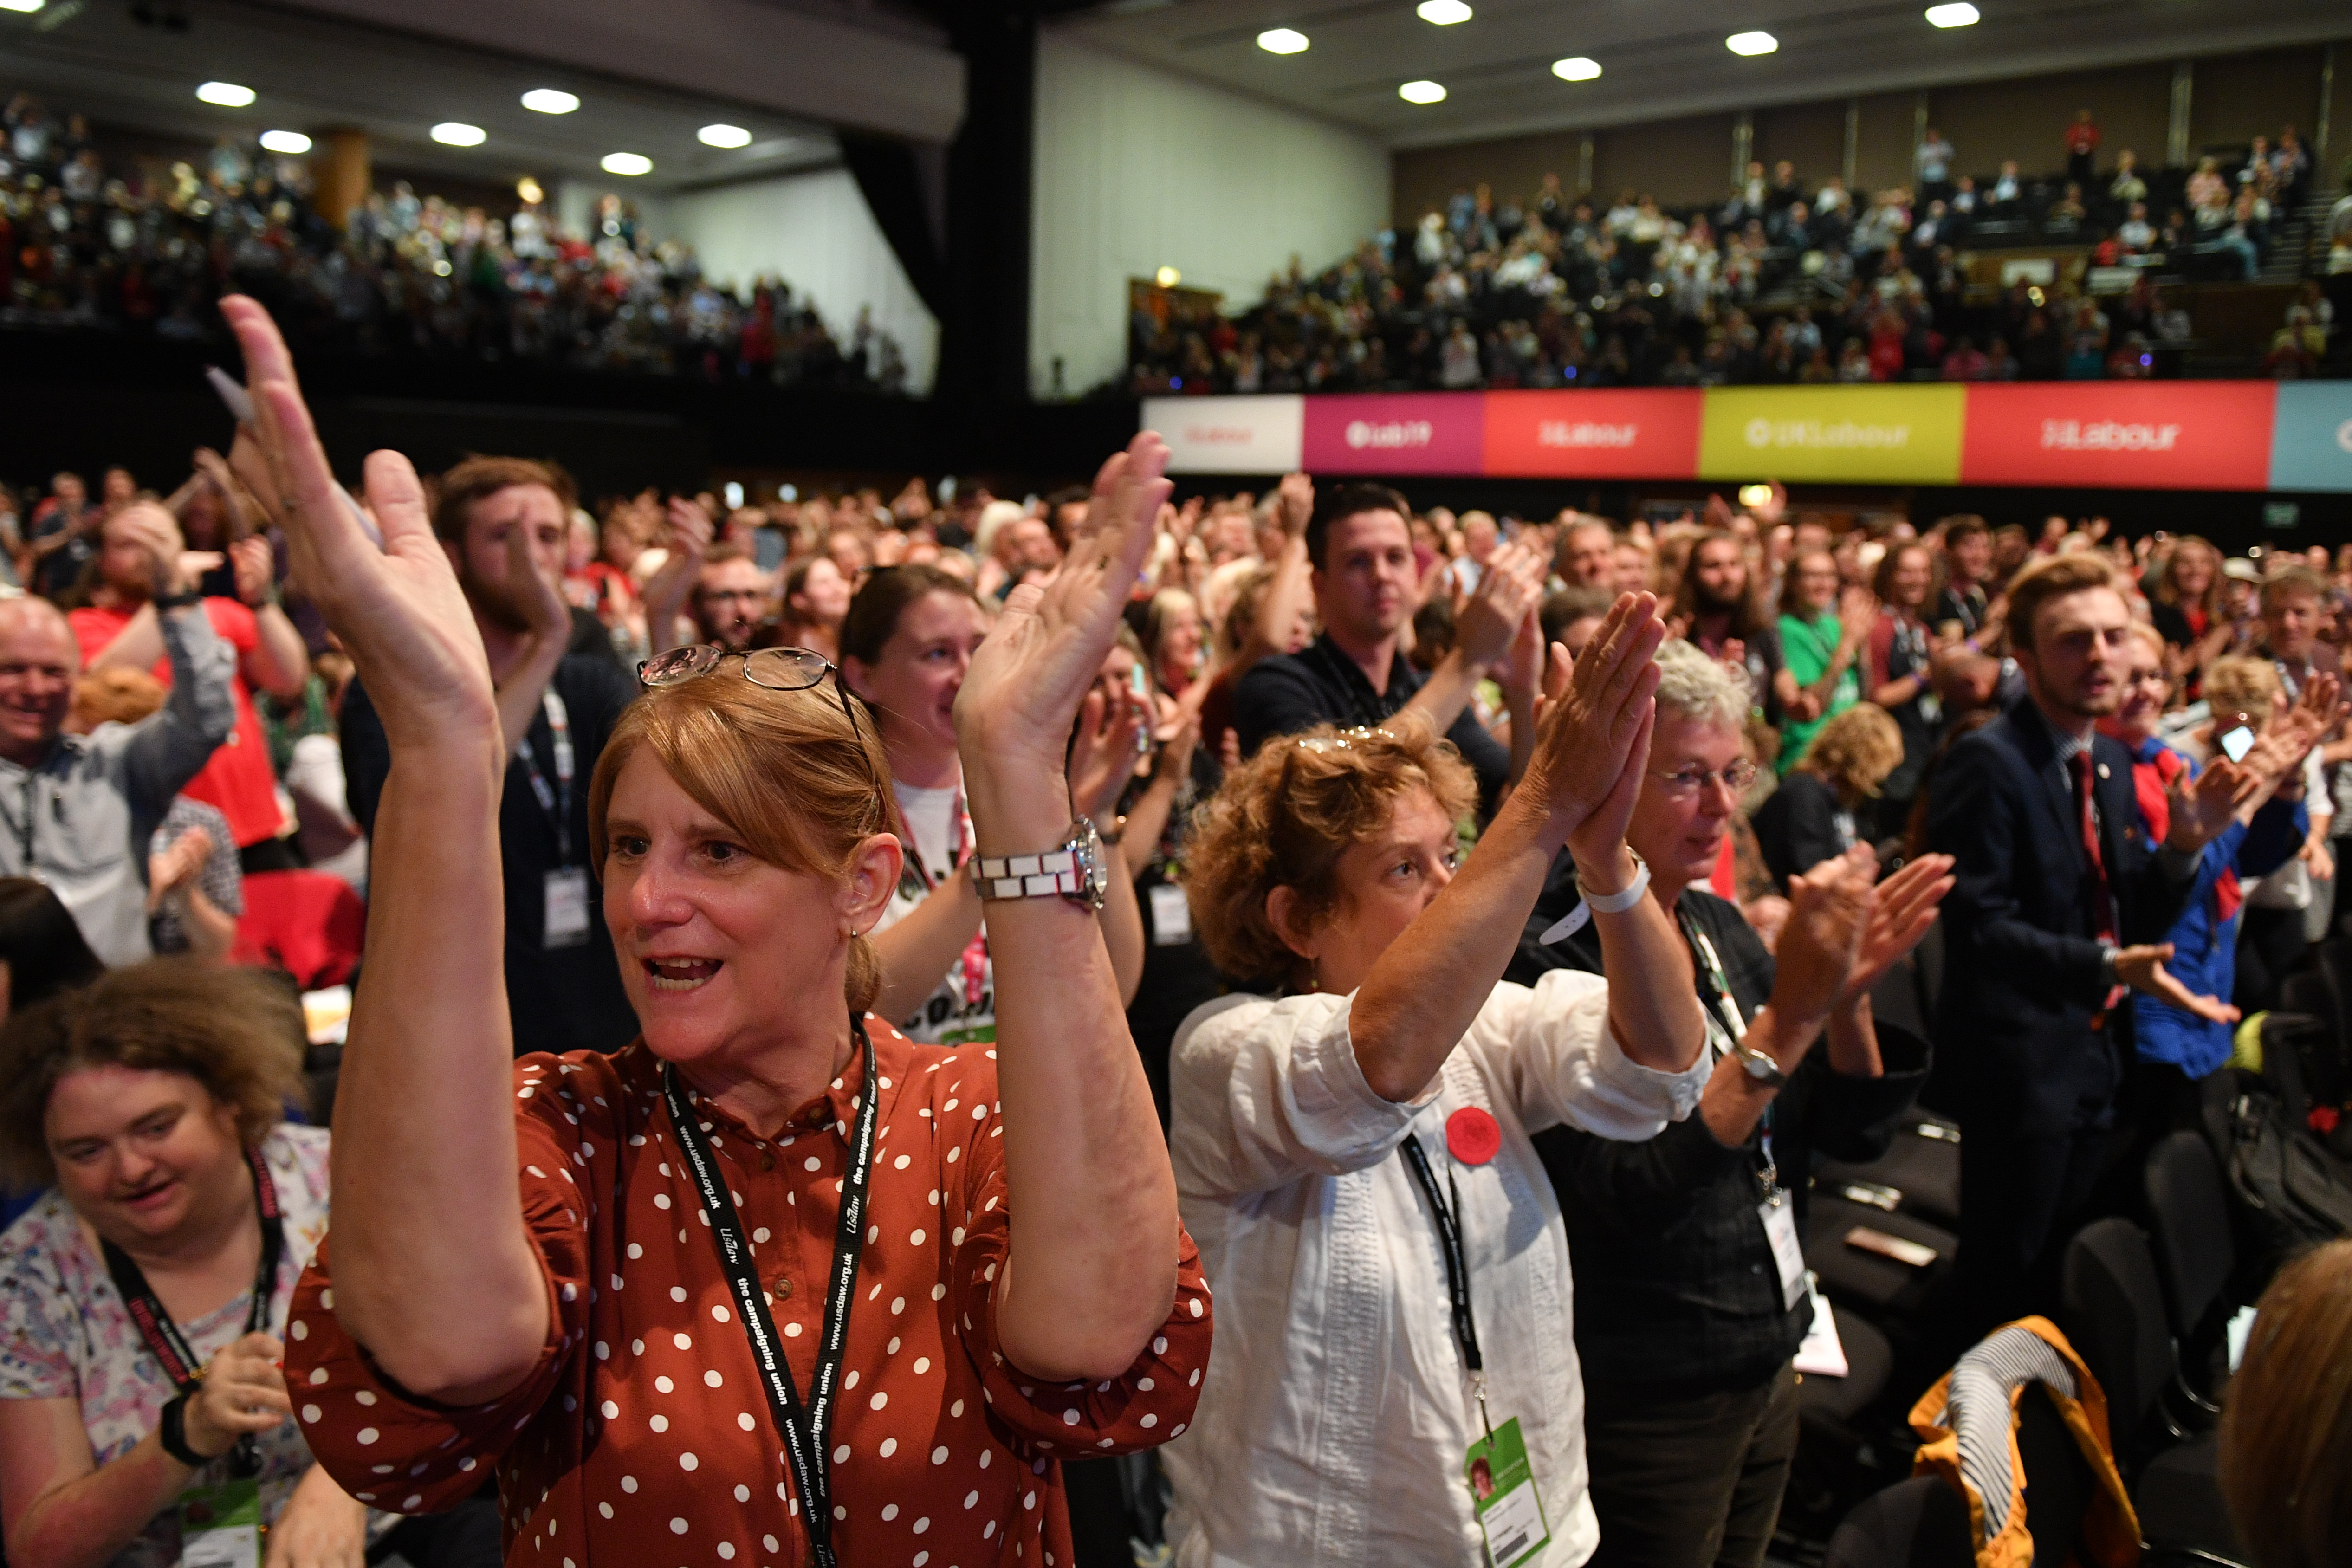 A standing ovation is given for Unite union general secretary Len McCluskey after he delivers a speech at the Labour party conference in Brighton (AFP)